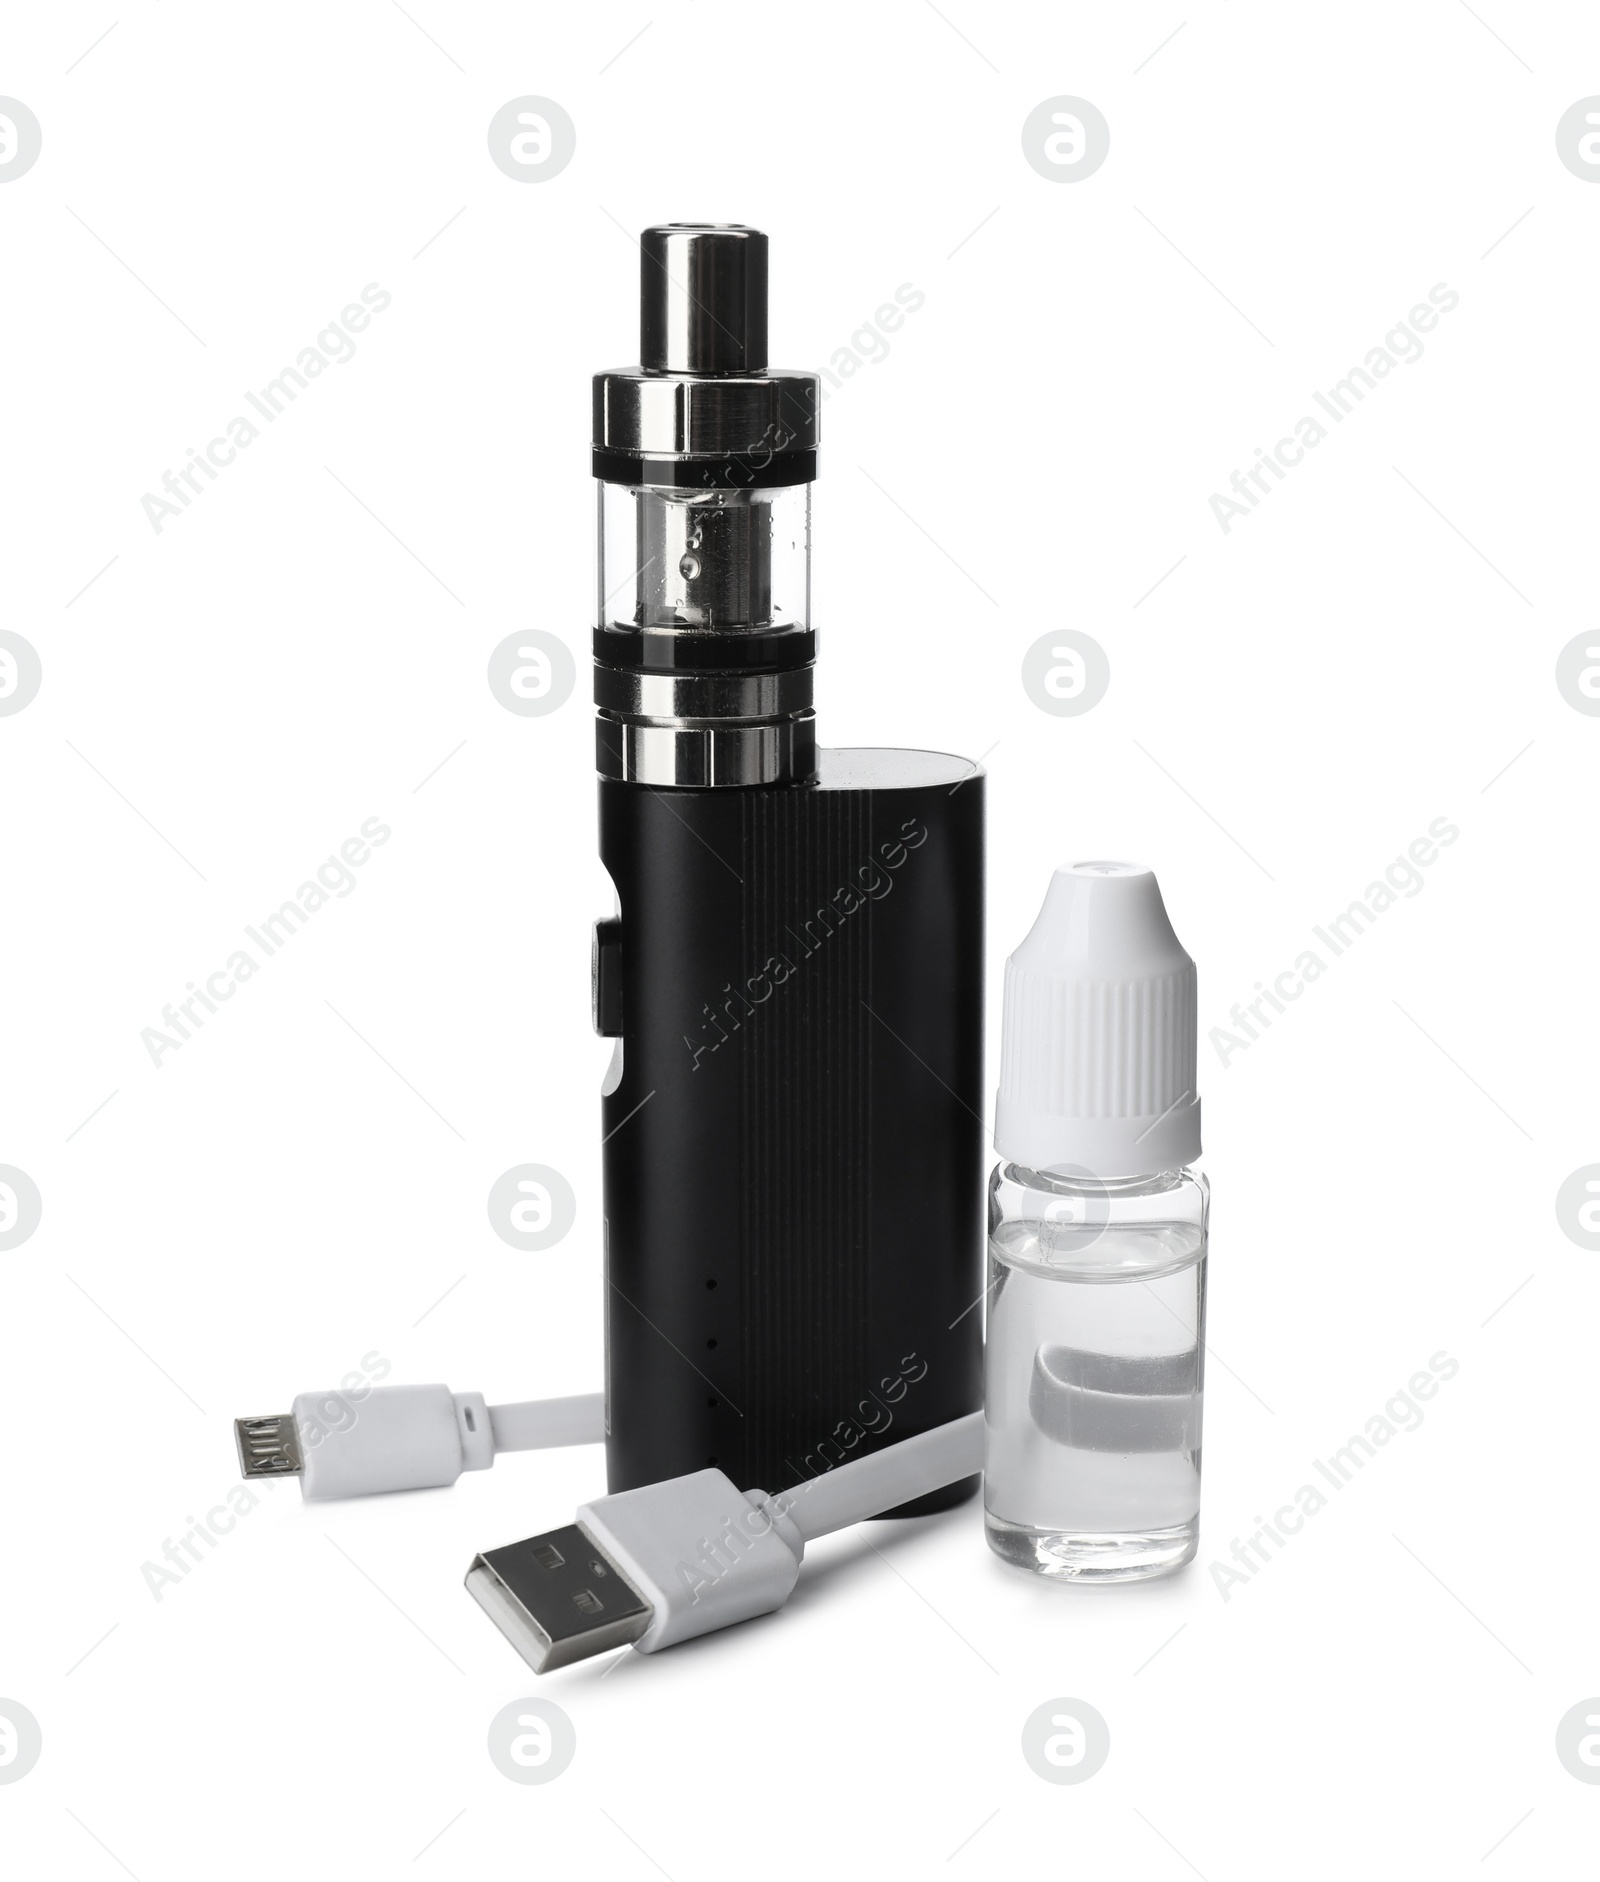 Photo of Electronic smoking device, vaping liquid and charging cable on white background